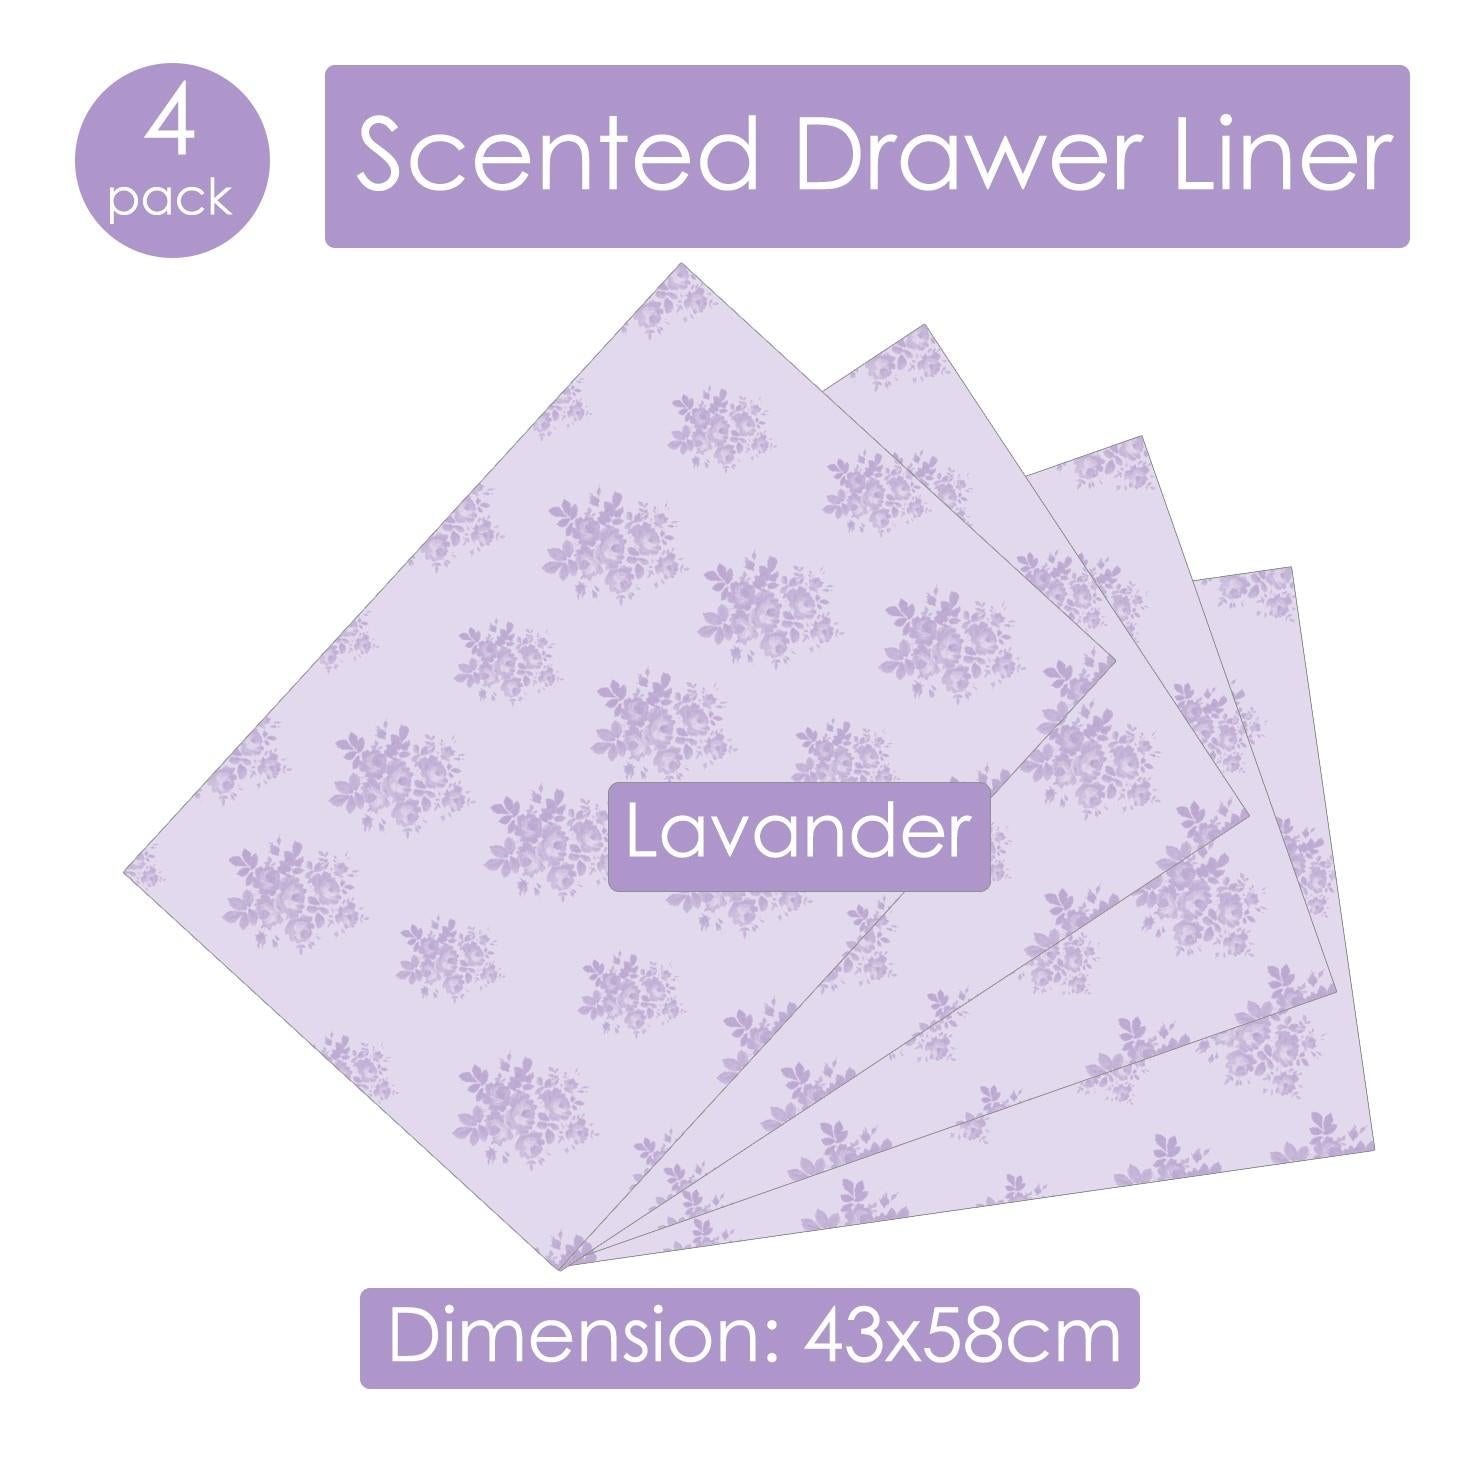 Scented Draw Liners 4 Pack Ocean Breeze, Jasmine, Wild Rose, Lavender 43x58cm - ZYBUX